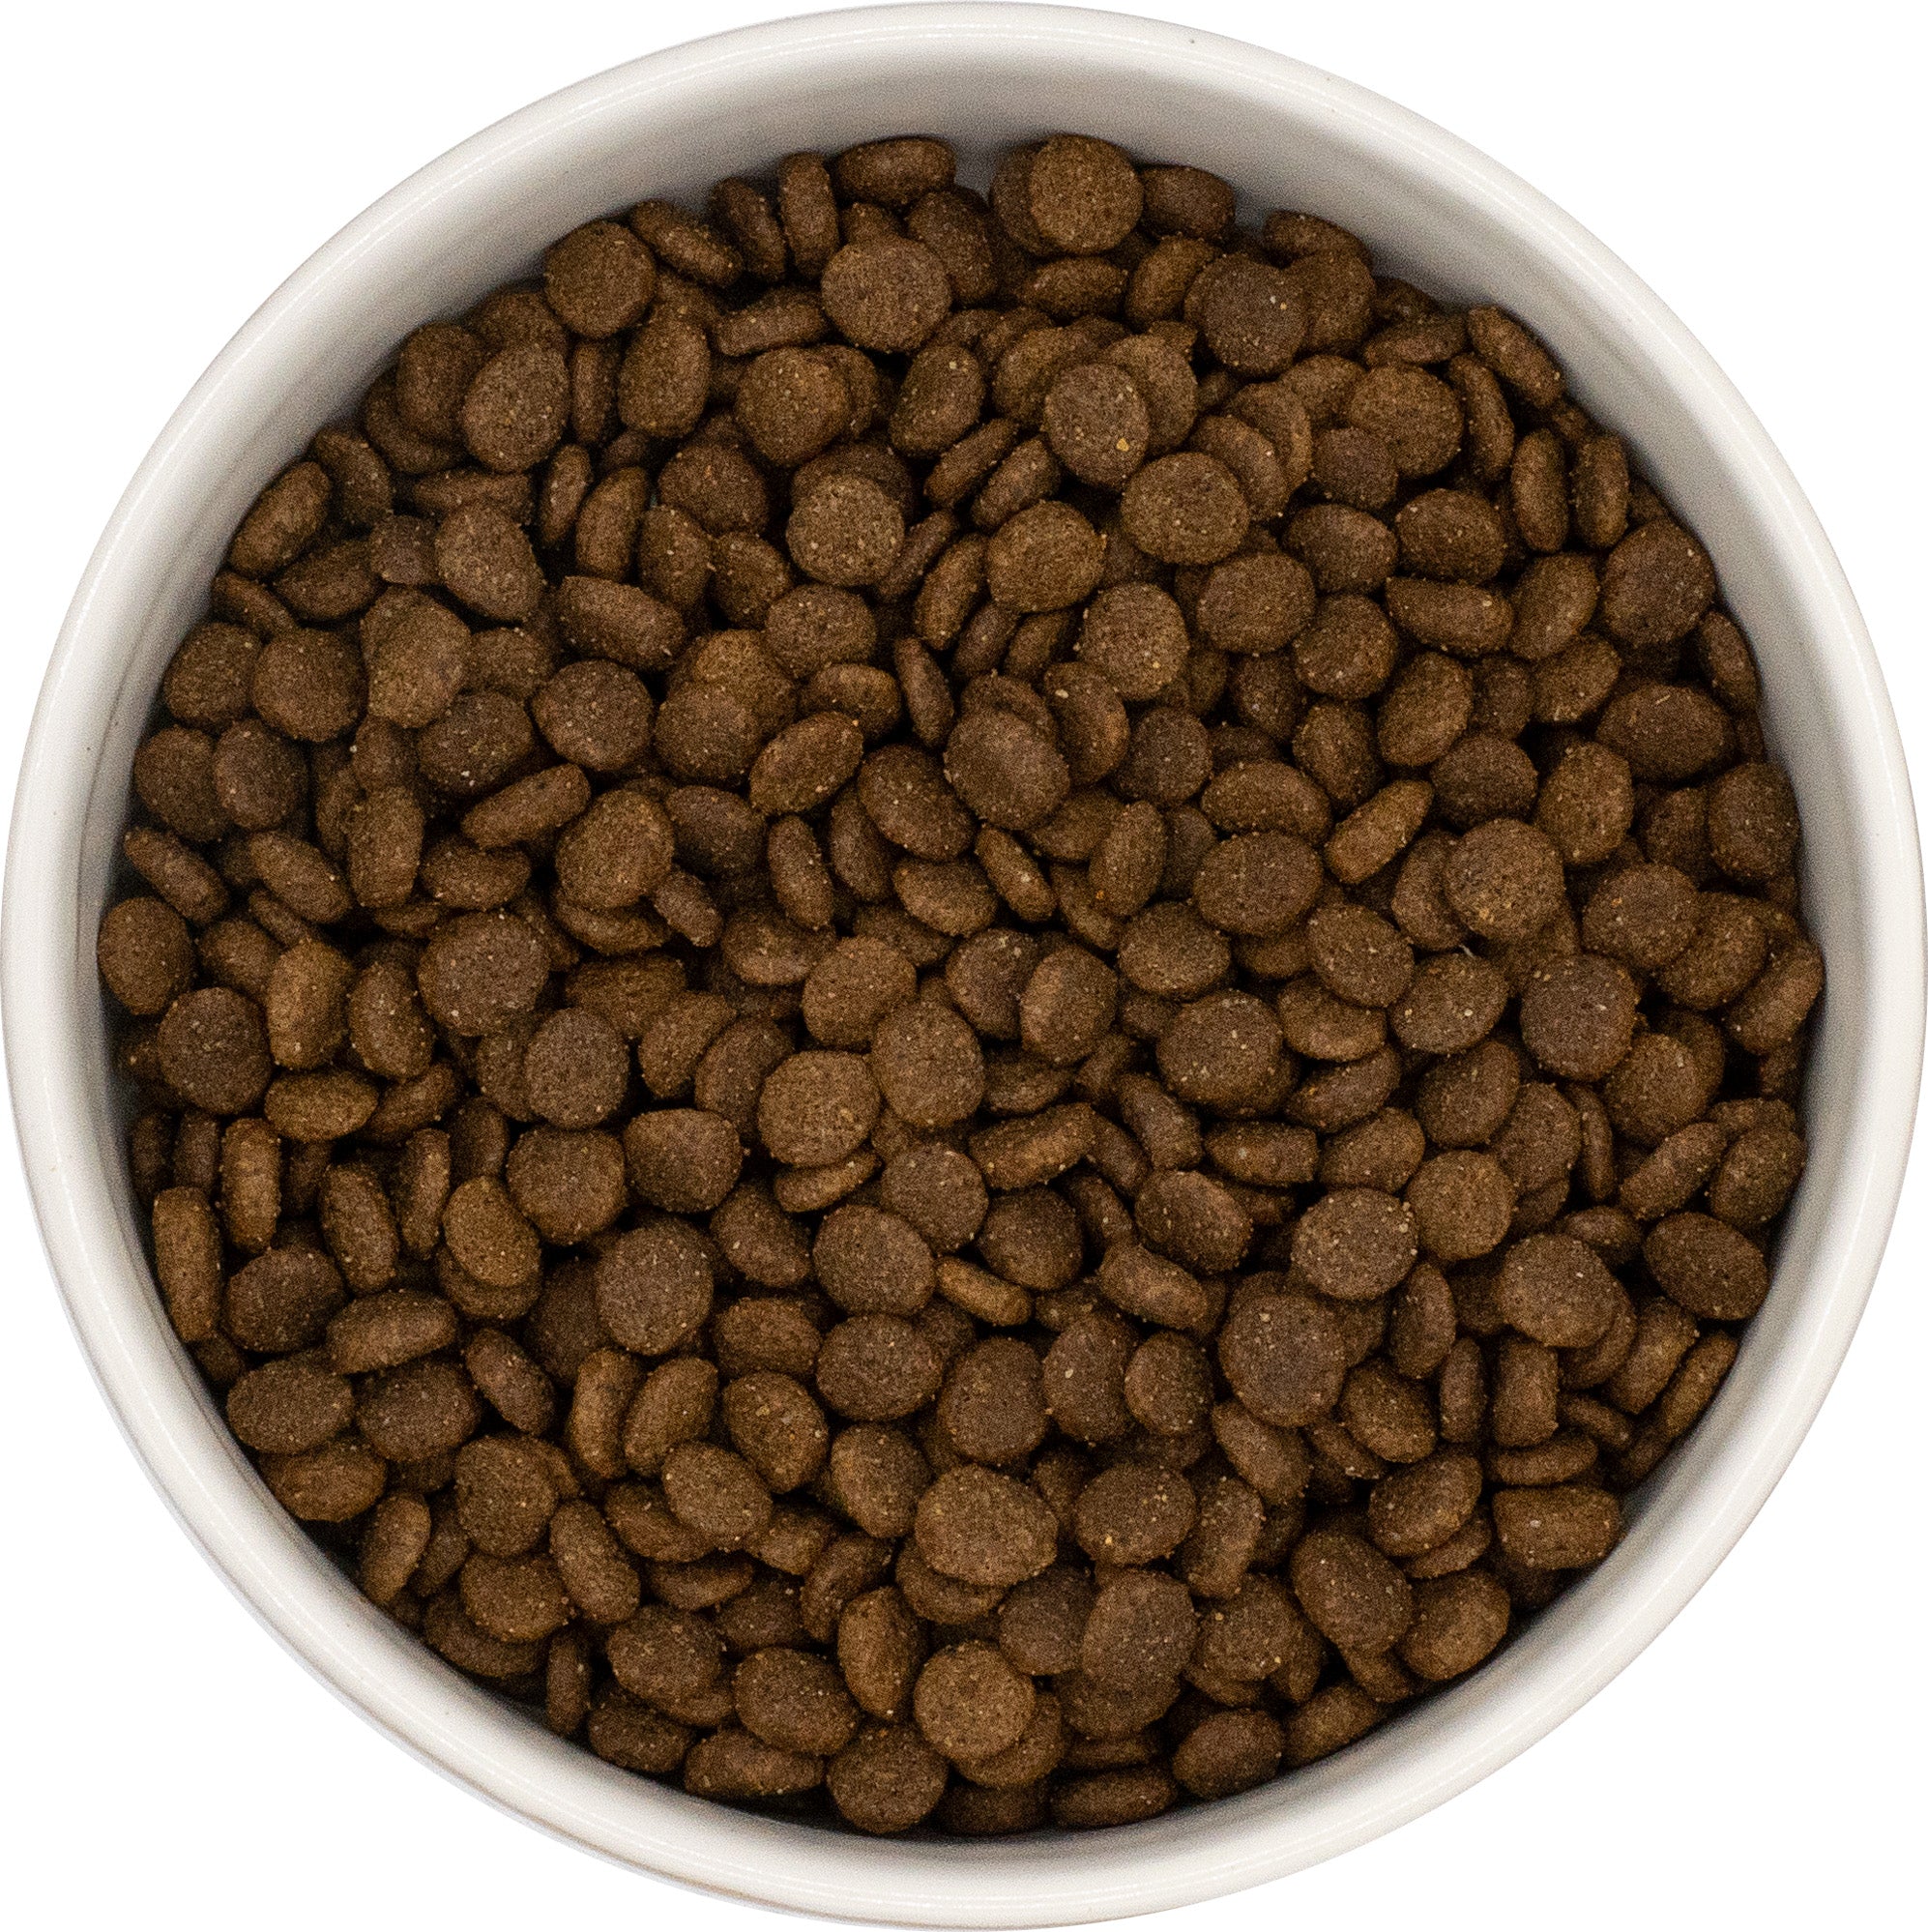 Turkey with duck and sweet potato small breed puppy food